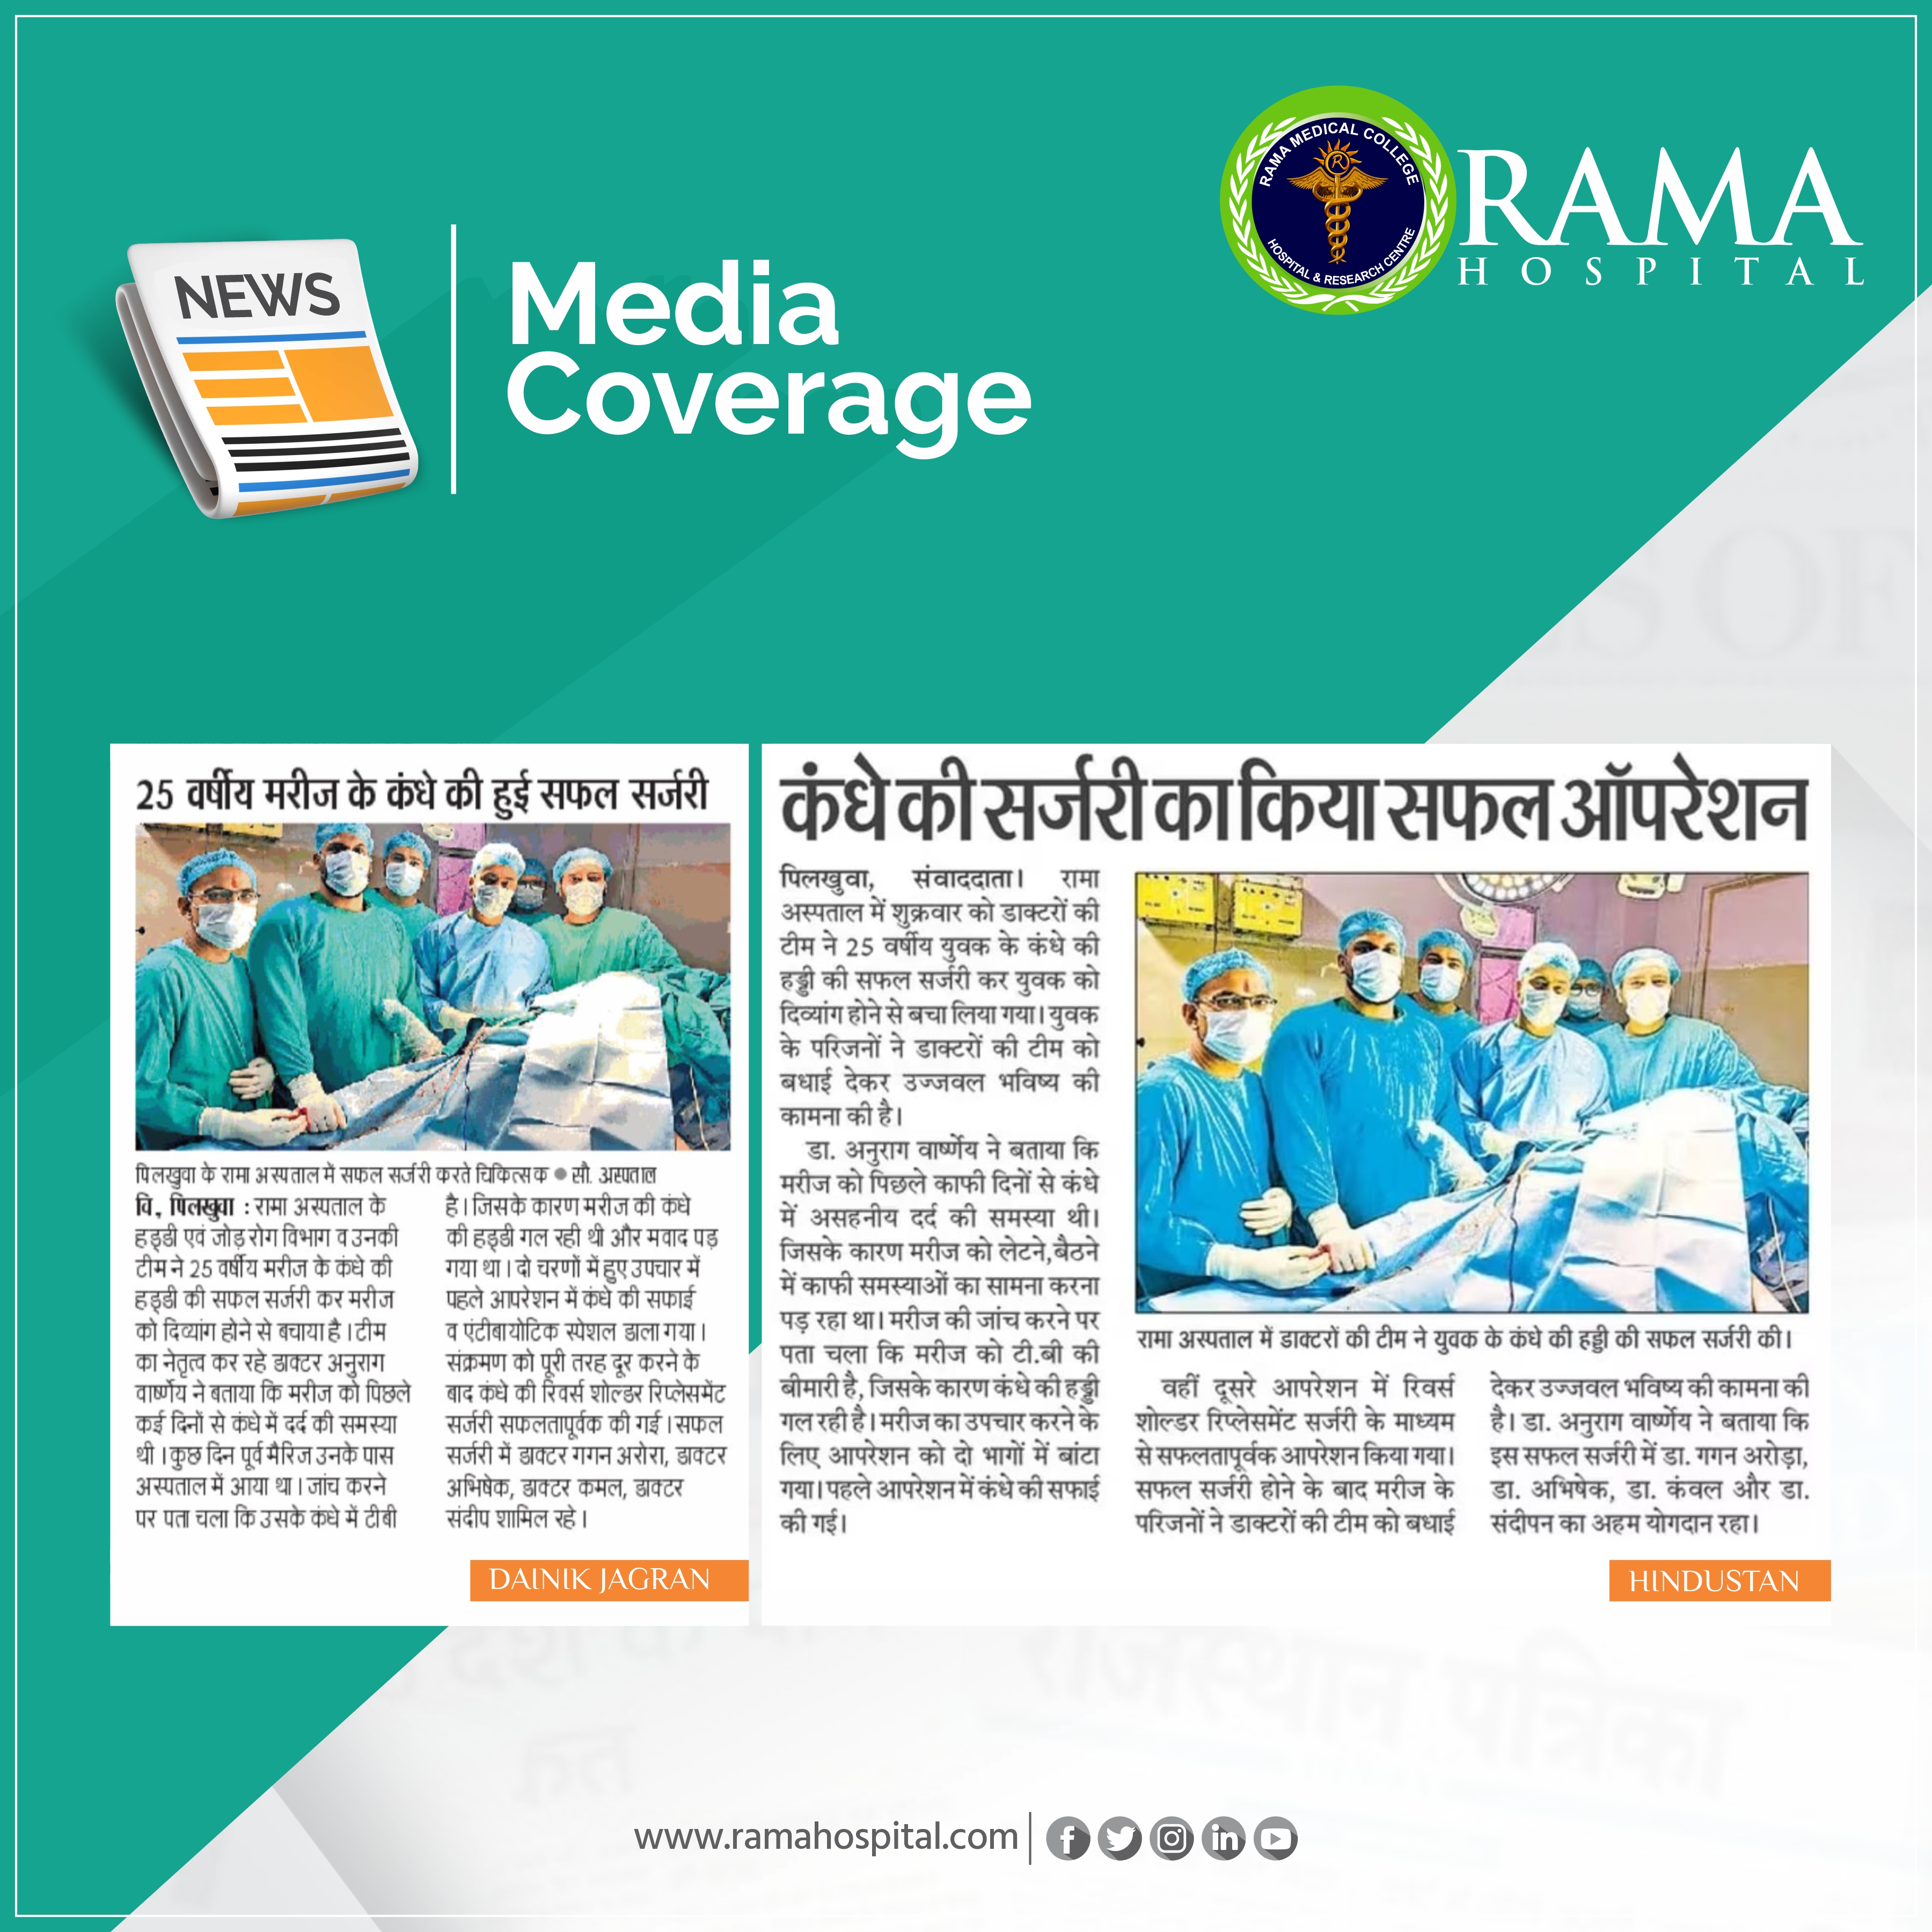 Rama Hospital Achieves Surgical Triumph with Successful Shoulder Op...